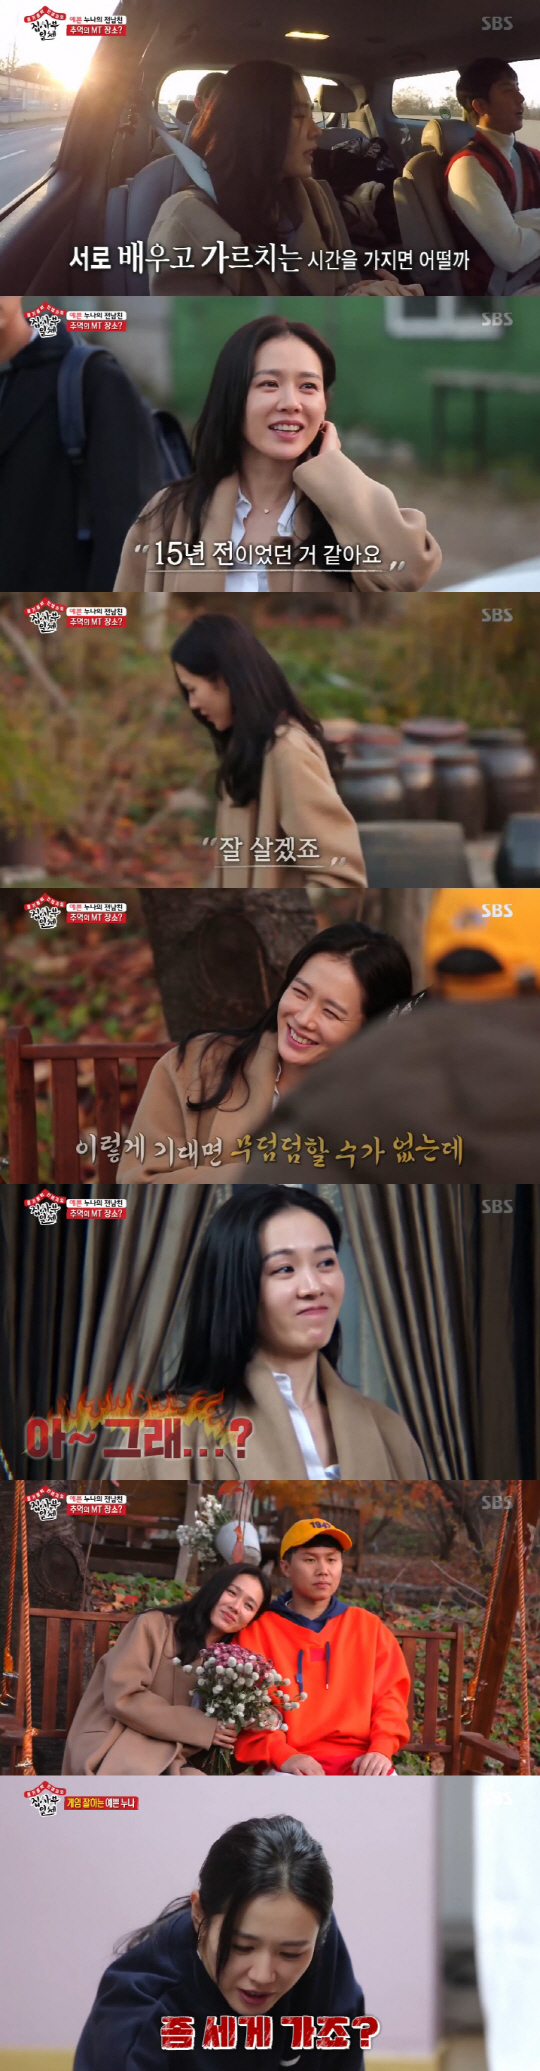 All The Butlers Son Ye-jin has made an MT trip for members YG Entertainment.On SBS All The Butlers broadcasted on the 2nd, Son Ye-jin appeared as the first anniversary MT YG Entertainment.Gong Hyo-jin, who played as a hint fairy on the day, said of the master, Im worried Ill pass out because I like it.I am worried that the two sides will cry. He added, I am close and I am going to honeymoon together.The Friend is a super-extraordinary friend with enormous momentum and no physical strength, so its perfect for a mans Friend, he added.Gong Hyo-jin also said, I have received many awards at various film festivals. I still receive a lot of awards.When this Friend goes up, I can not ride; I am the number one actress who has mobilized the most audience this year, said Master.In addition, Gong Hyo-jin said, This Friend thinks it is important to keep his promise. It is a big deal if you get caught after exaggerated.It is the queen of Game. You have to give it to me. It will be a difficult day. He advised, Do not give too much competition. Finally, Gong Hyo-jin promised coolly, I will go to Christmas or the municipal Gift, not the master, but the Gift.All The Butlers members headed to the house where they were invited first, unaware of the identity of Son Ye-jin; members who opened the front door and entered admired the scent is so good.The members who checked their clothes once again came into the house, and the pictures were hanging all over the place, creating a gallery-like atmosphere.Son Ye-jin, who was hiding secretly in the kitchen, appeared with a cake; the members facing Son Ye-jin could no longer speak with an incredulous look.In particular, the upbringing material was twisted and the ears were red and smiled.Son Ye-jin, who first unveiled his house through All The Butlers, certified him as a fun-seeing program.She said, I thought it was awkward to hear the name Sabu, but I thought it was not a good person. But I had the first anniversary and I wanted to give Gift.In addition, Son Ye-jin impressed the members by preparing food ingredients, snacks such as ramen and medicine, and game tools for MT of.Son Ye-jin, who planned all of the MTs, said: The trip without a plan and the trip to plan and go seem really different.I do not think its better to find out where you went to go to the restaurant, he said confidently.On this day, Son Ye-jin led the members to Pilates Studio to keep his promise before going to MT.Its a place that comes more often than home, Son Ye-jin said, Ive been there for over 10 years.My agency has been going for 19 years, and my hair salon has been going for almost 15 years. Son Ye-jin introduced his 10-year self-management know-how, saying he even earned a TRX instructor certificate eight years ago; Son Ye-jin used several instruments to demonstrate a tremendous intensity of Pilates.In particular, Son Ye-jin showed an elegant posture with a gyrotonic instrument; the members were impressed by the feeling of seeing a ballet performance.In the car heading to the MT place, Son Ye-jin mentioned in advance that he gave thinking about each others learning points homework.I am too anxious to teach as a master like you, he said. I think there will be something we will learn from each other.The members decided to name the club Ye Ye Ye Ye and arrived with a thrilling heart.When the members asked Son Ye-jin why he decided to place the place here, Son Ye-jin surprised the members by introducing it as a place where I went with my ex-boyfriend 15 years ago, in my early 20s.Turns out this pension was where it appeared in the movie The Eraser in My Head. So Son Ye-jin and the members reenacted a scene of the movie and took a commemorative photo.Meanwhile, club chairman Son Ye-jin suggested a dinner bet game.Son Ye-jin, who usually likes Game, explained the game tools he had prepared himself and showed a child-like excitement.However, when the game started, the members were nervous with a 180-degree change of eyes.Also, the members said, I will not see you as the president, he said, Is not it natural?